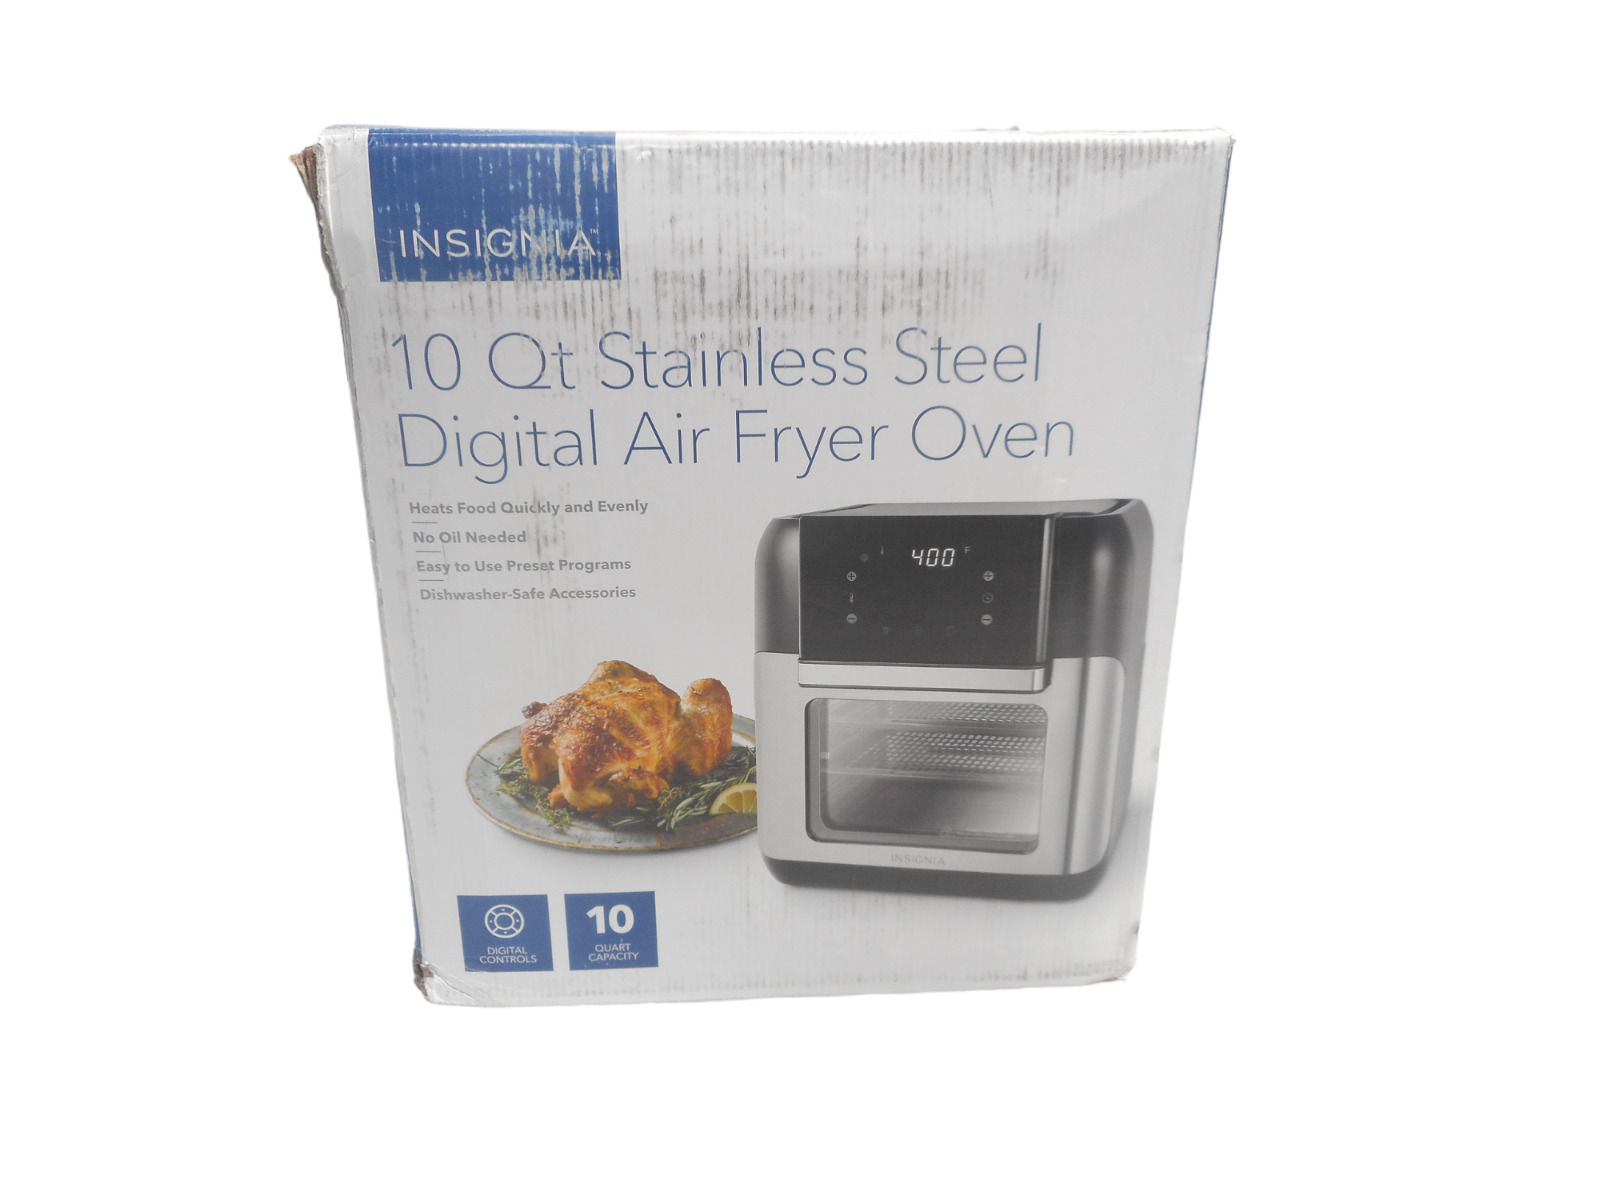 Insignia- 10 Qt. Digital Air Fryer Oven - Stainless Steel ON SALE AT BEST BUY!